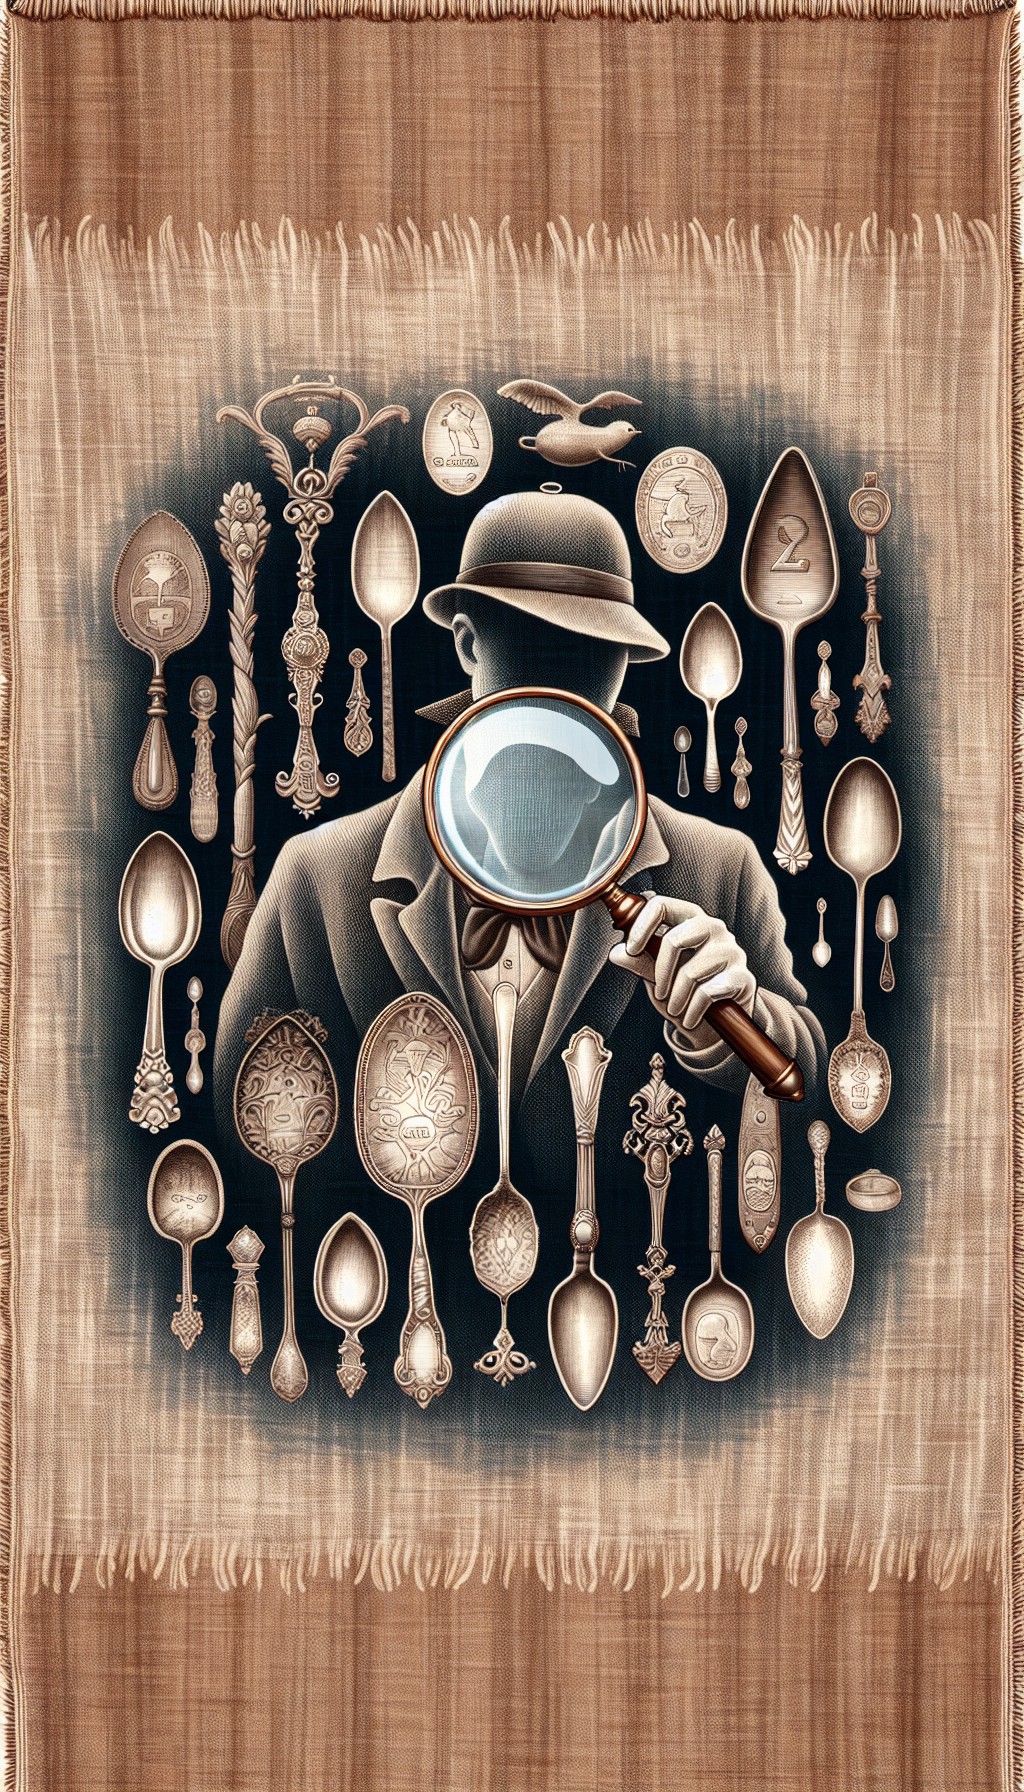 An illustrative tapestry unfolds with a magnifying glass hovering over a cluster of ornate antique spoons, its lens focusing on intricate hallmarks and maker's marks etched into their stems. The spoons, each styled with a distinct historic period (e.g., Baroque, Victorian), cast faint shadows forming symbolic timelines while a ghostly figure of an inspector with a detective hat scrutinizes their authenticity.